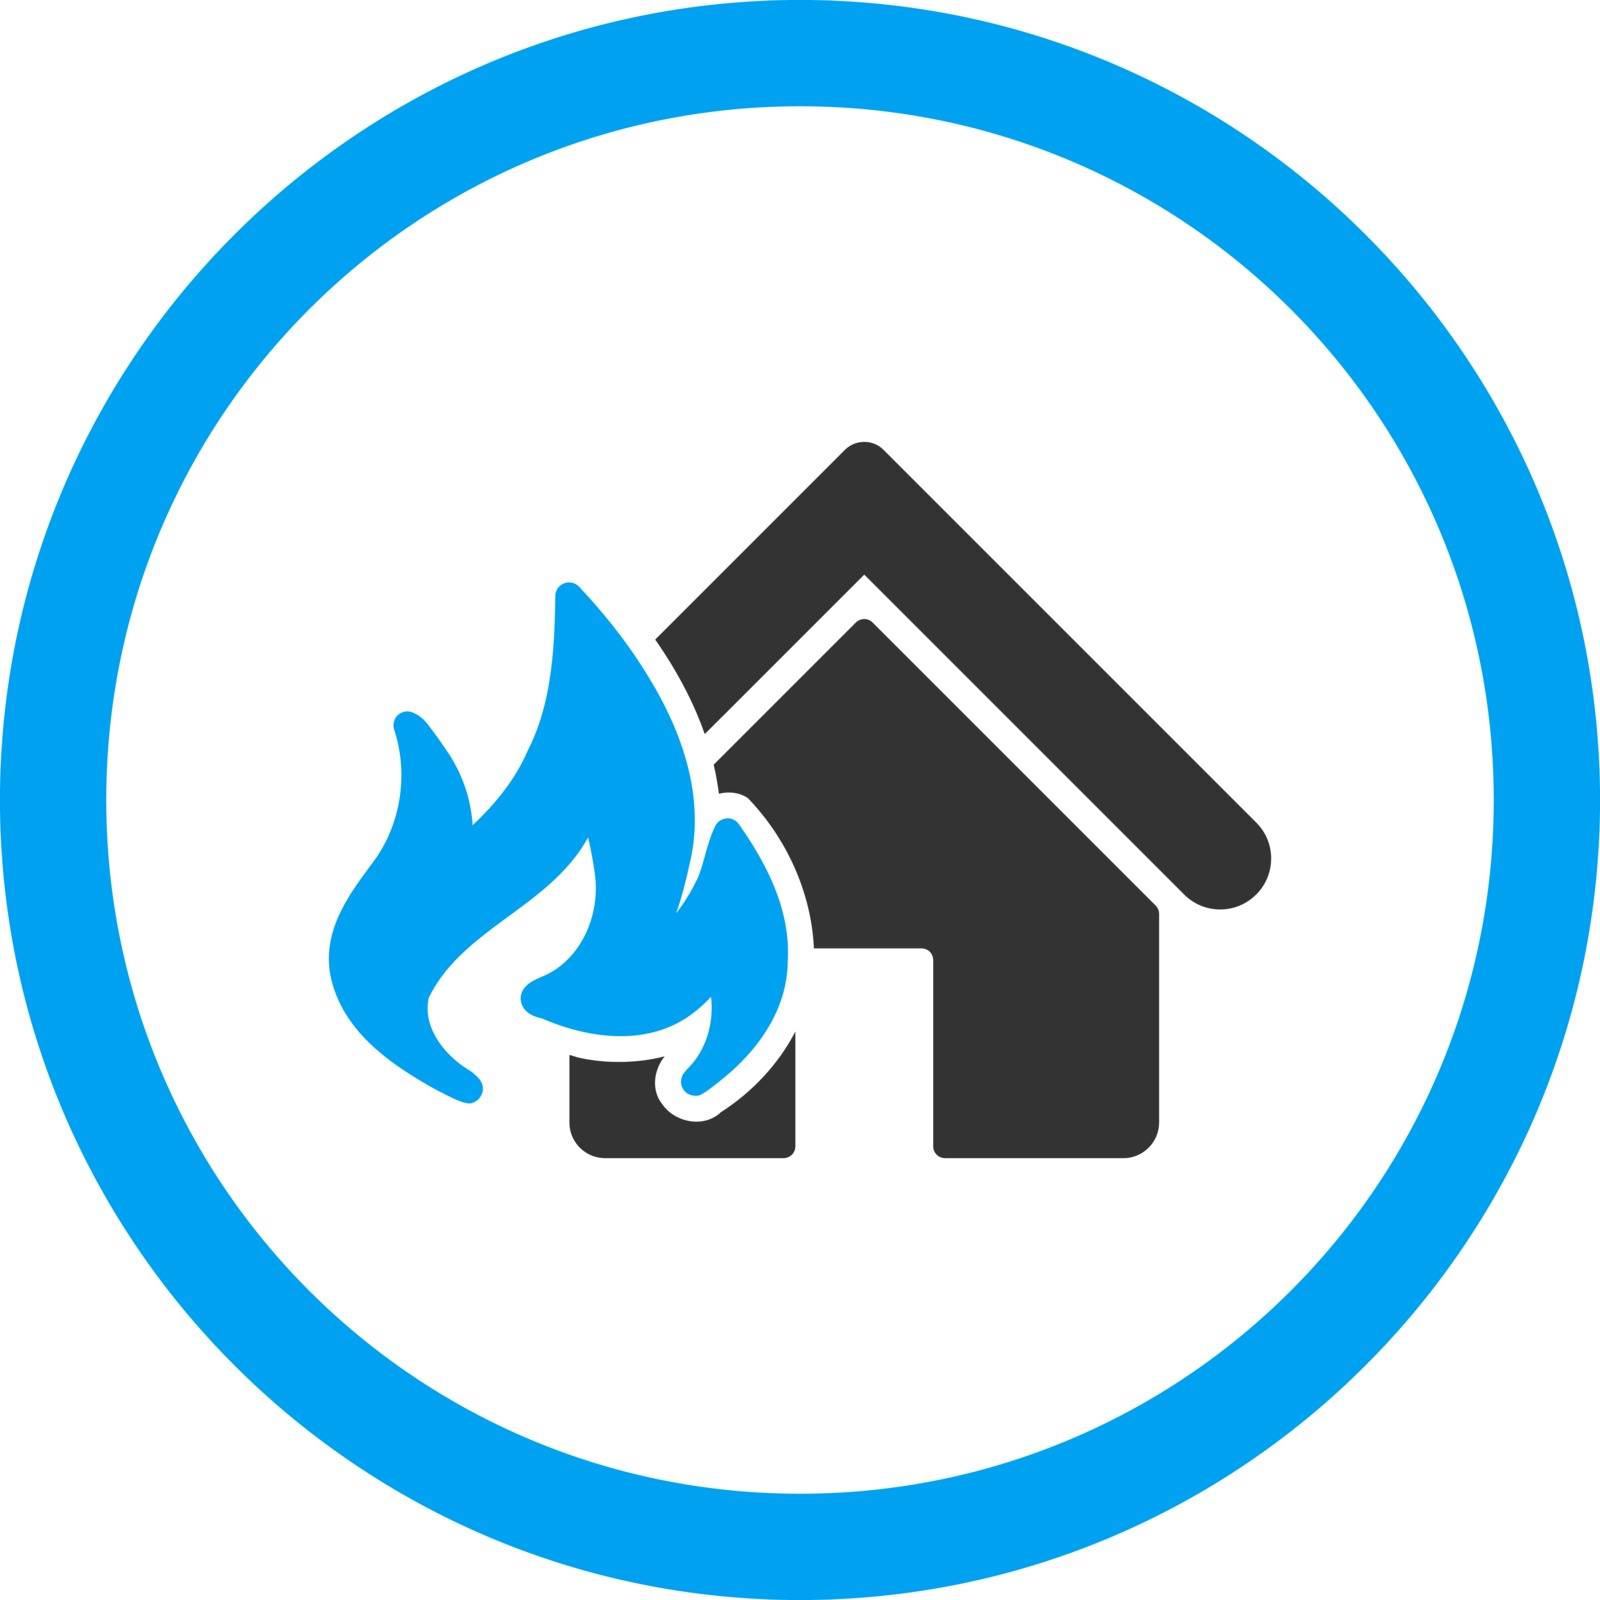 Fire Damage vector icon. This flat rounded symbol uses blue and gray colors and isolated on a white background.